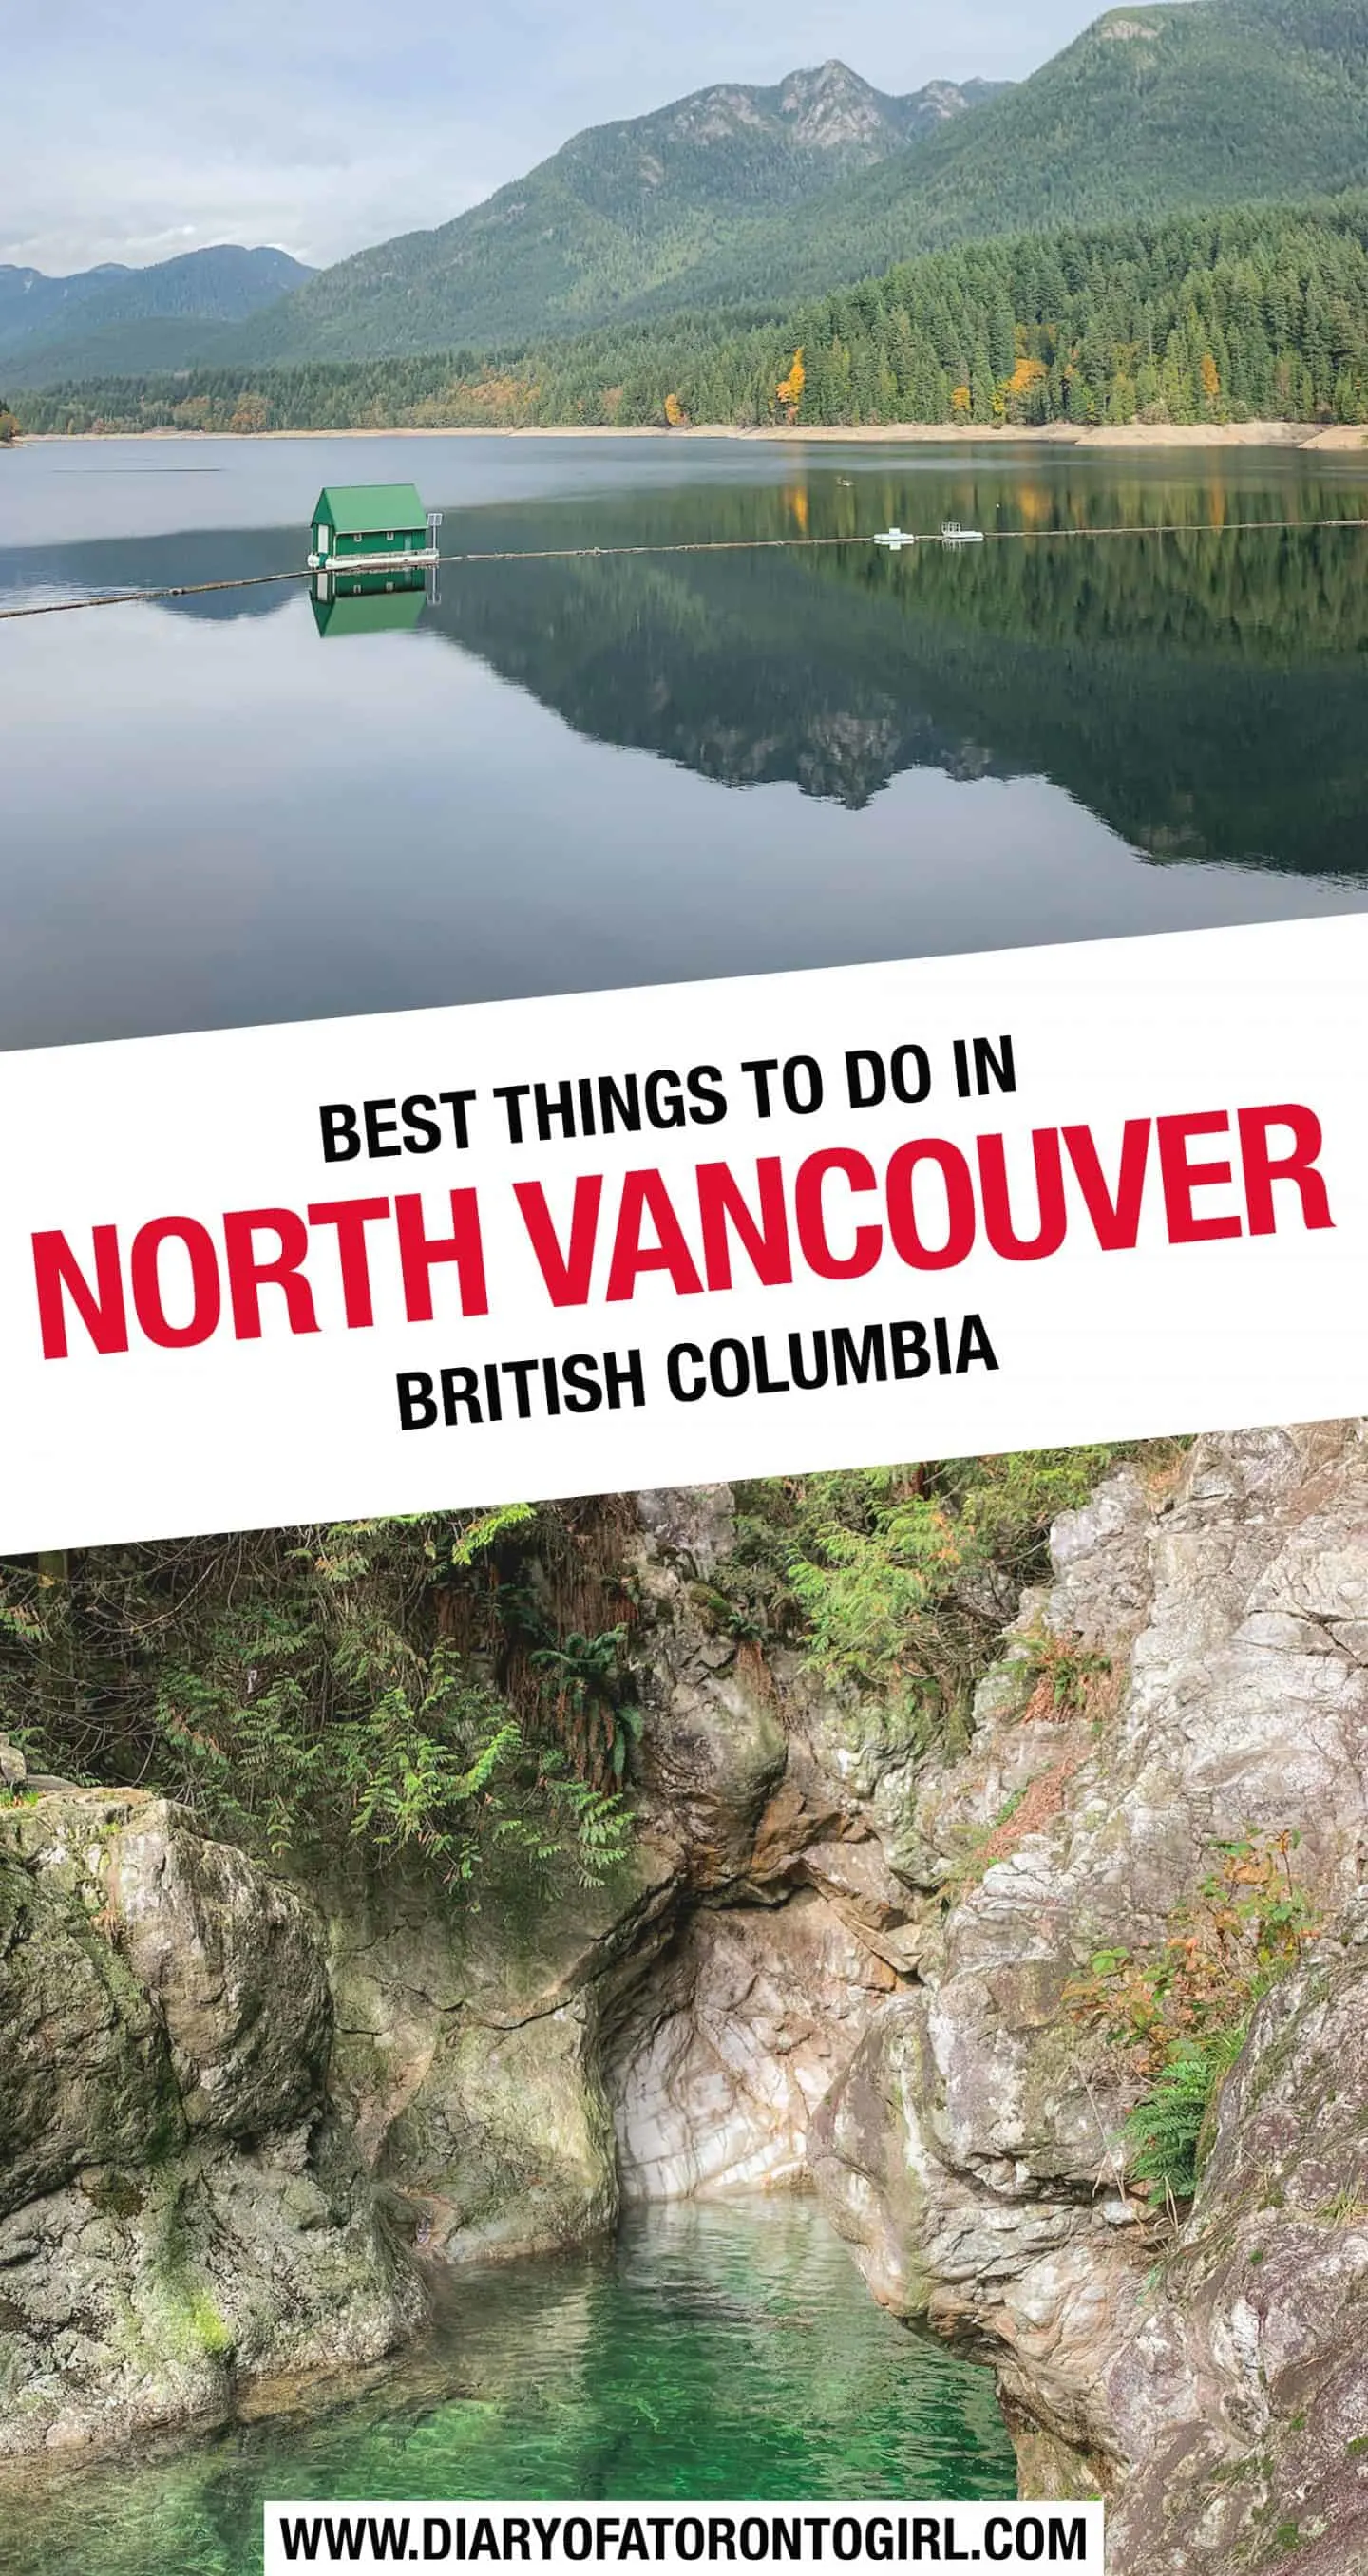 The best and most fun things to do in North Vancouver, British Columbia, including the perfect one day itinerary for exploring the neighbourhood!